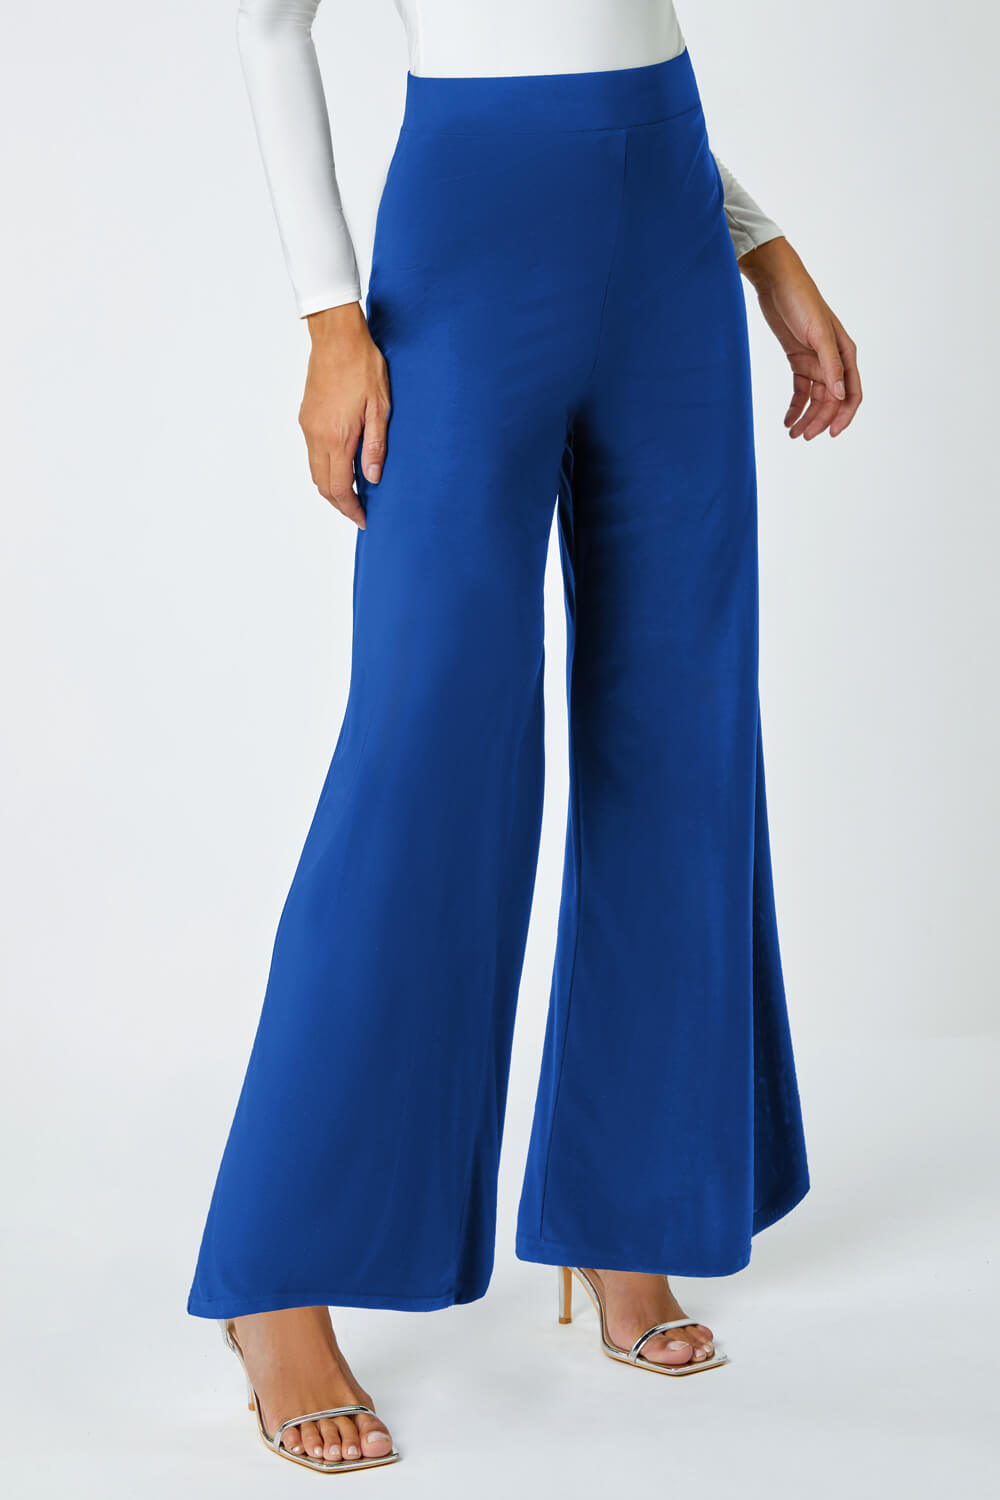 Blue Wide Leg Stretch Trousers, Image 4 of 5